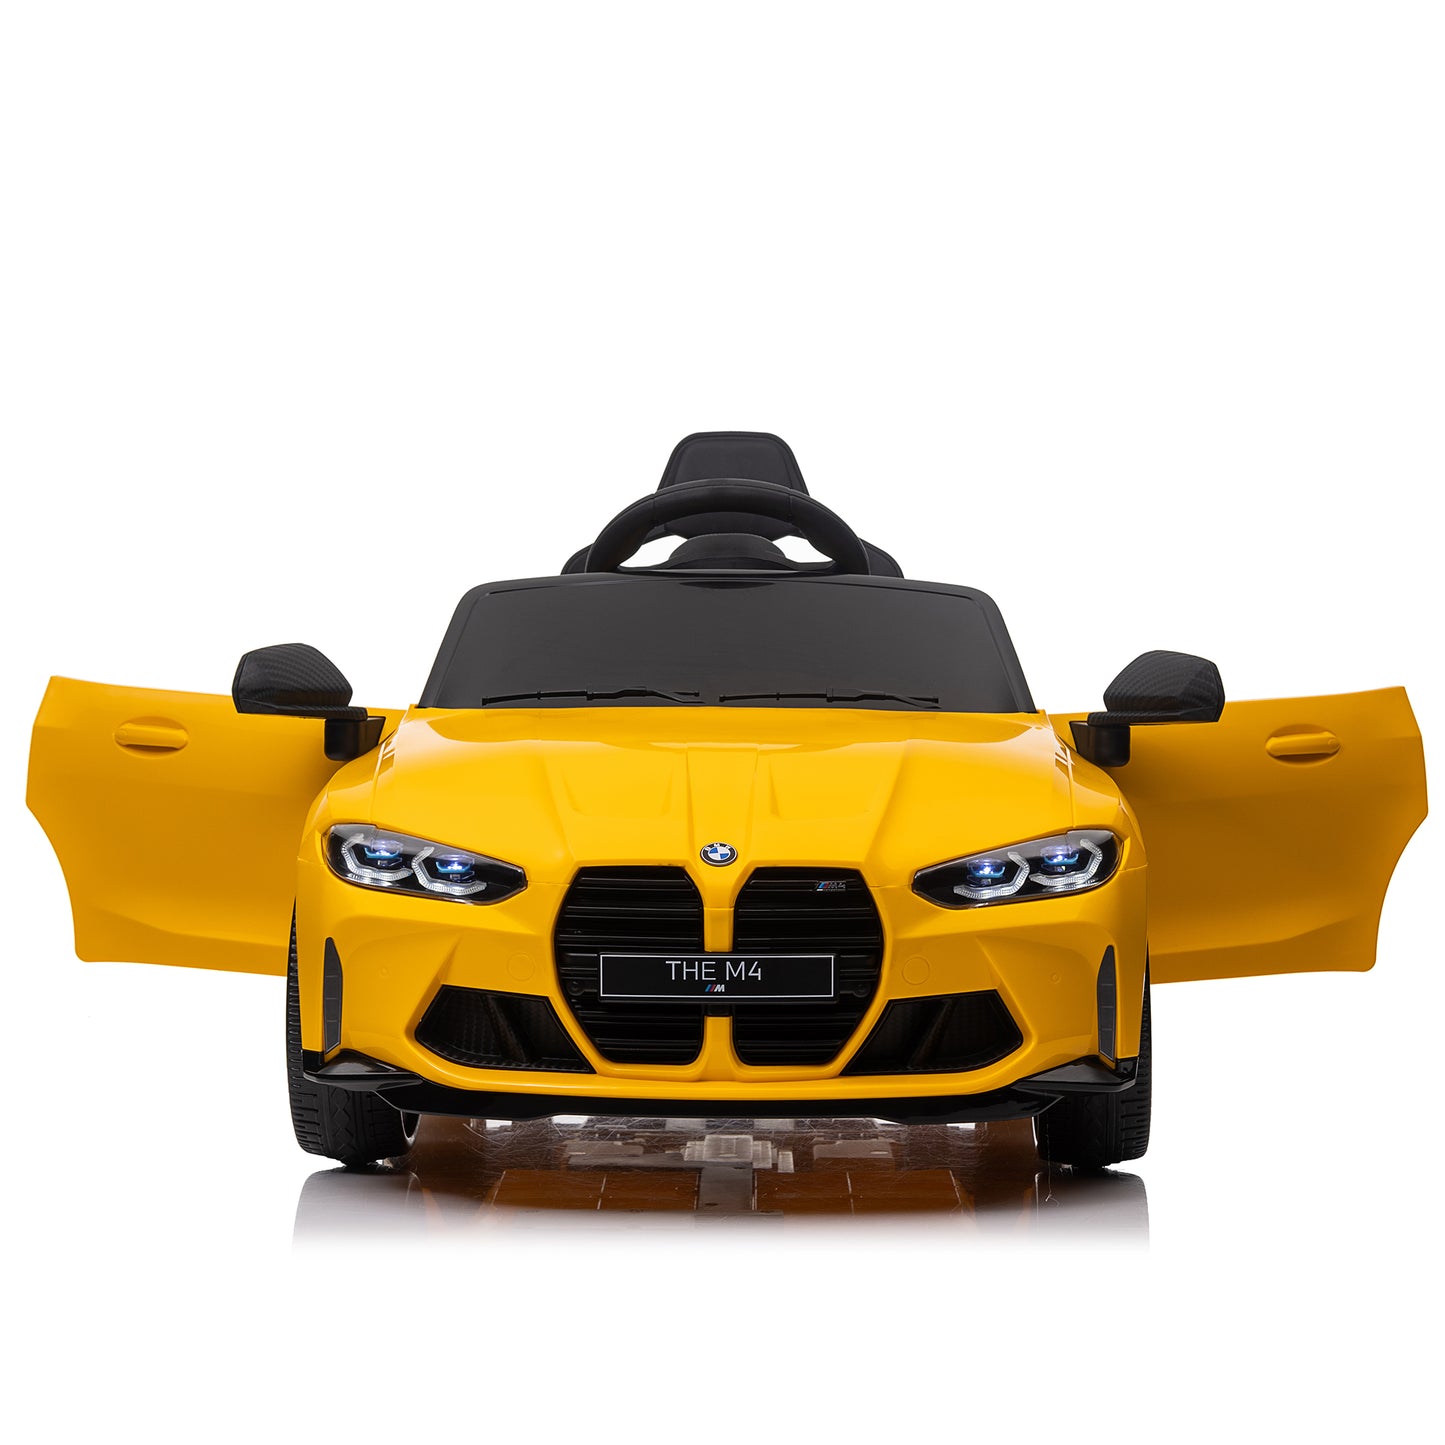 Yellow BMW M4 12v Kids ride on toy car 2.4G W/Parents Remote Control.